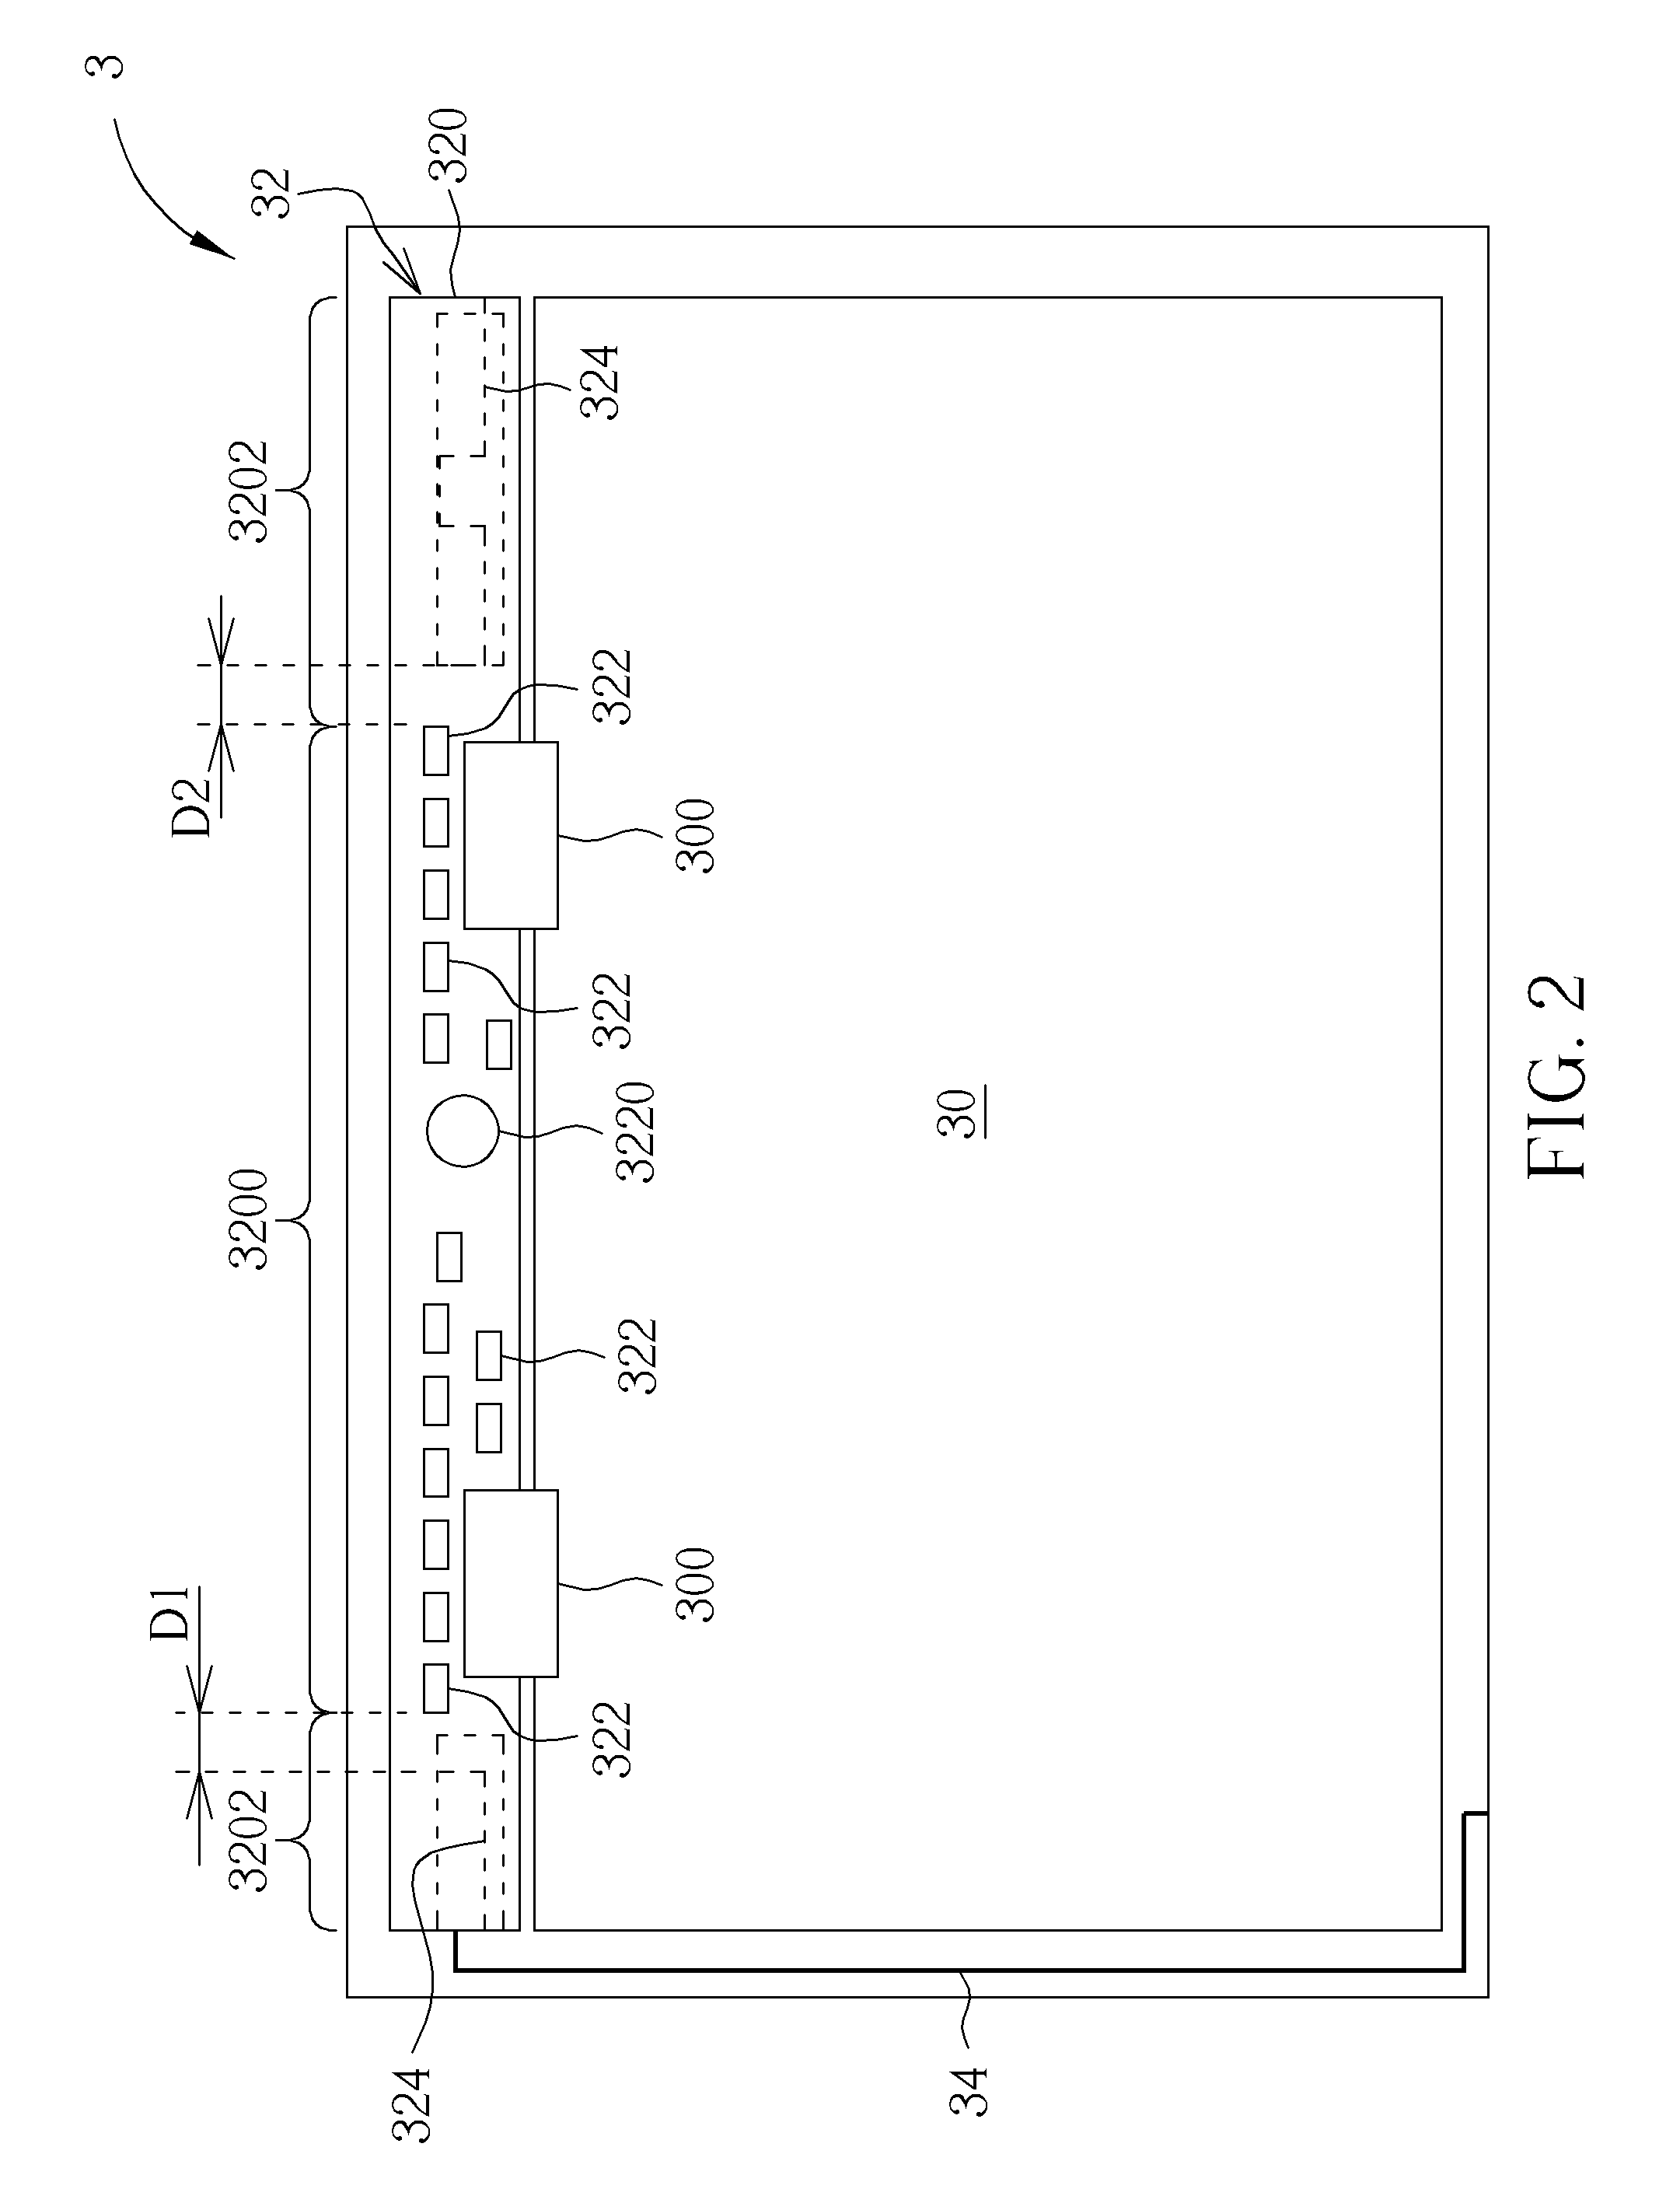 Integrated circuit board and display system